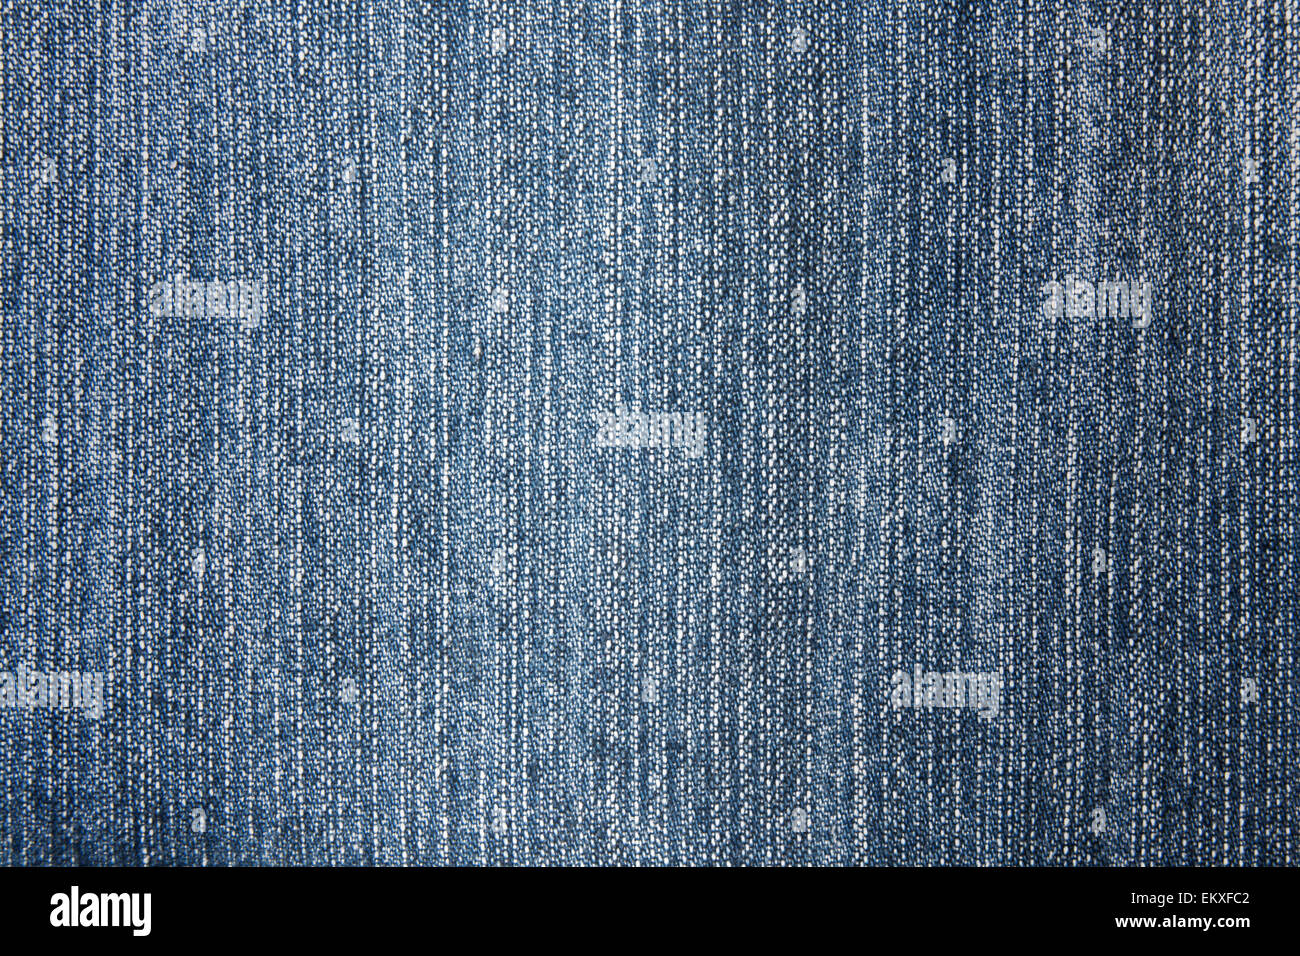 jeans background Stock Photo